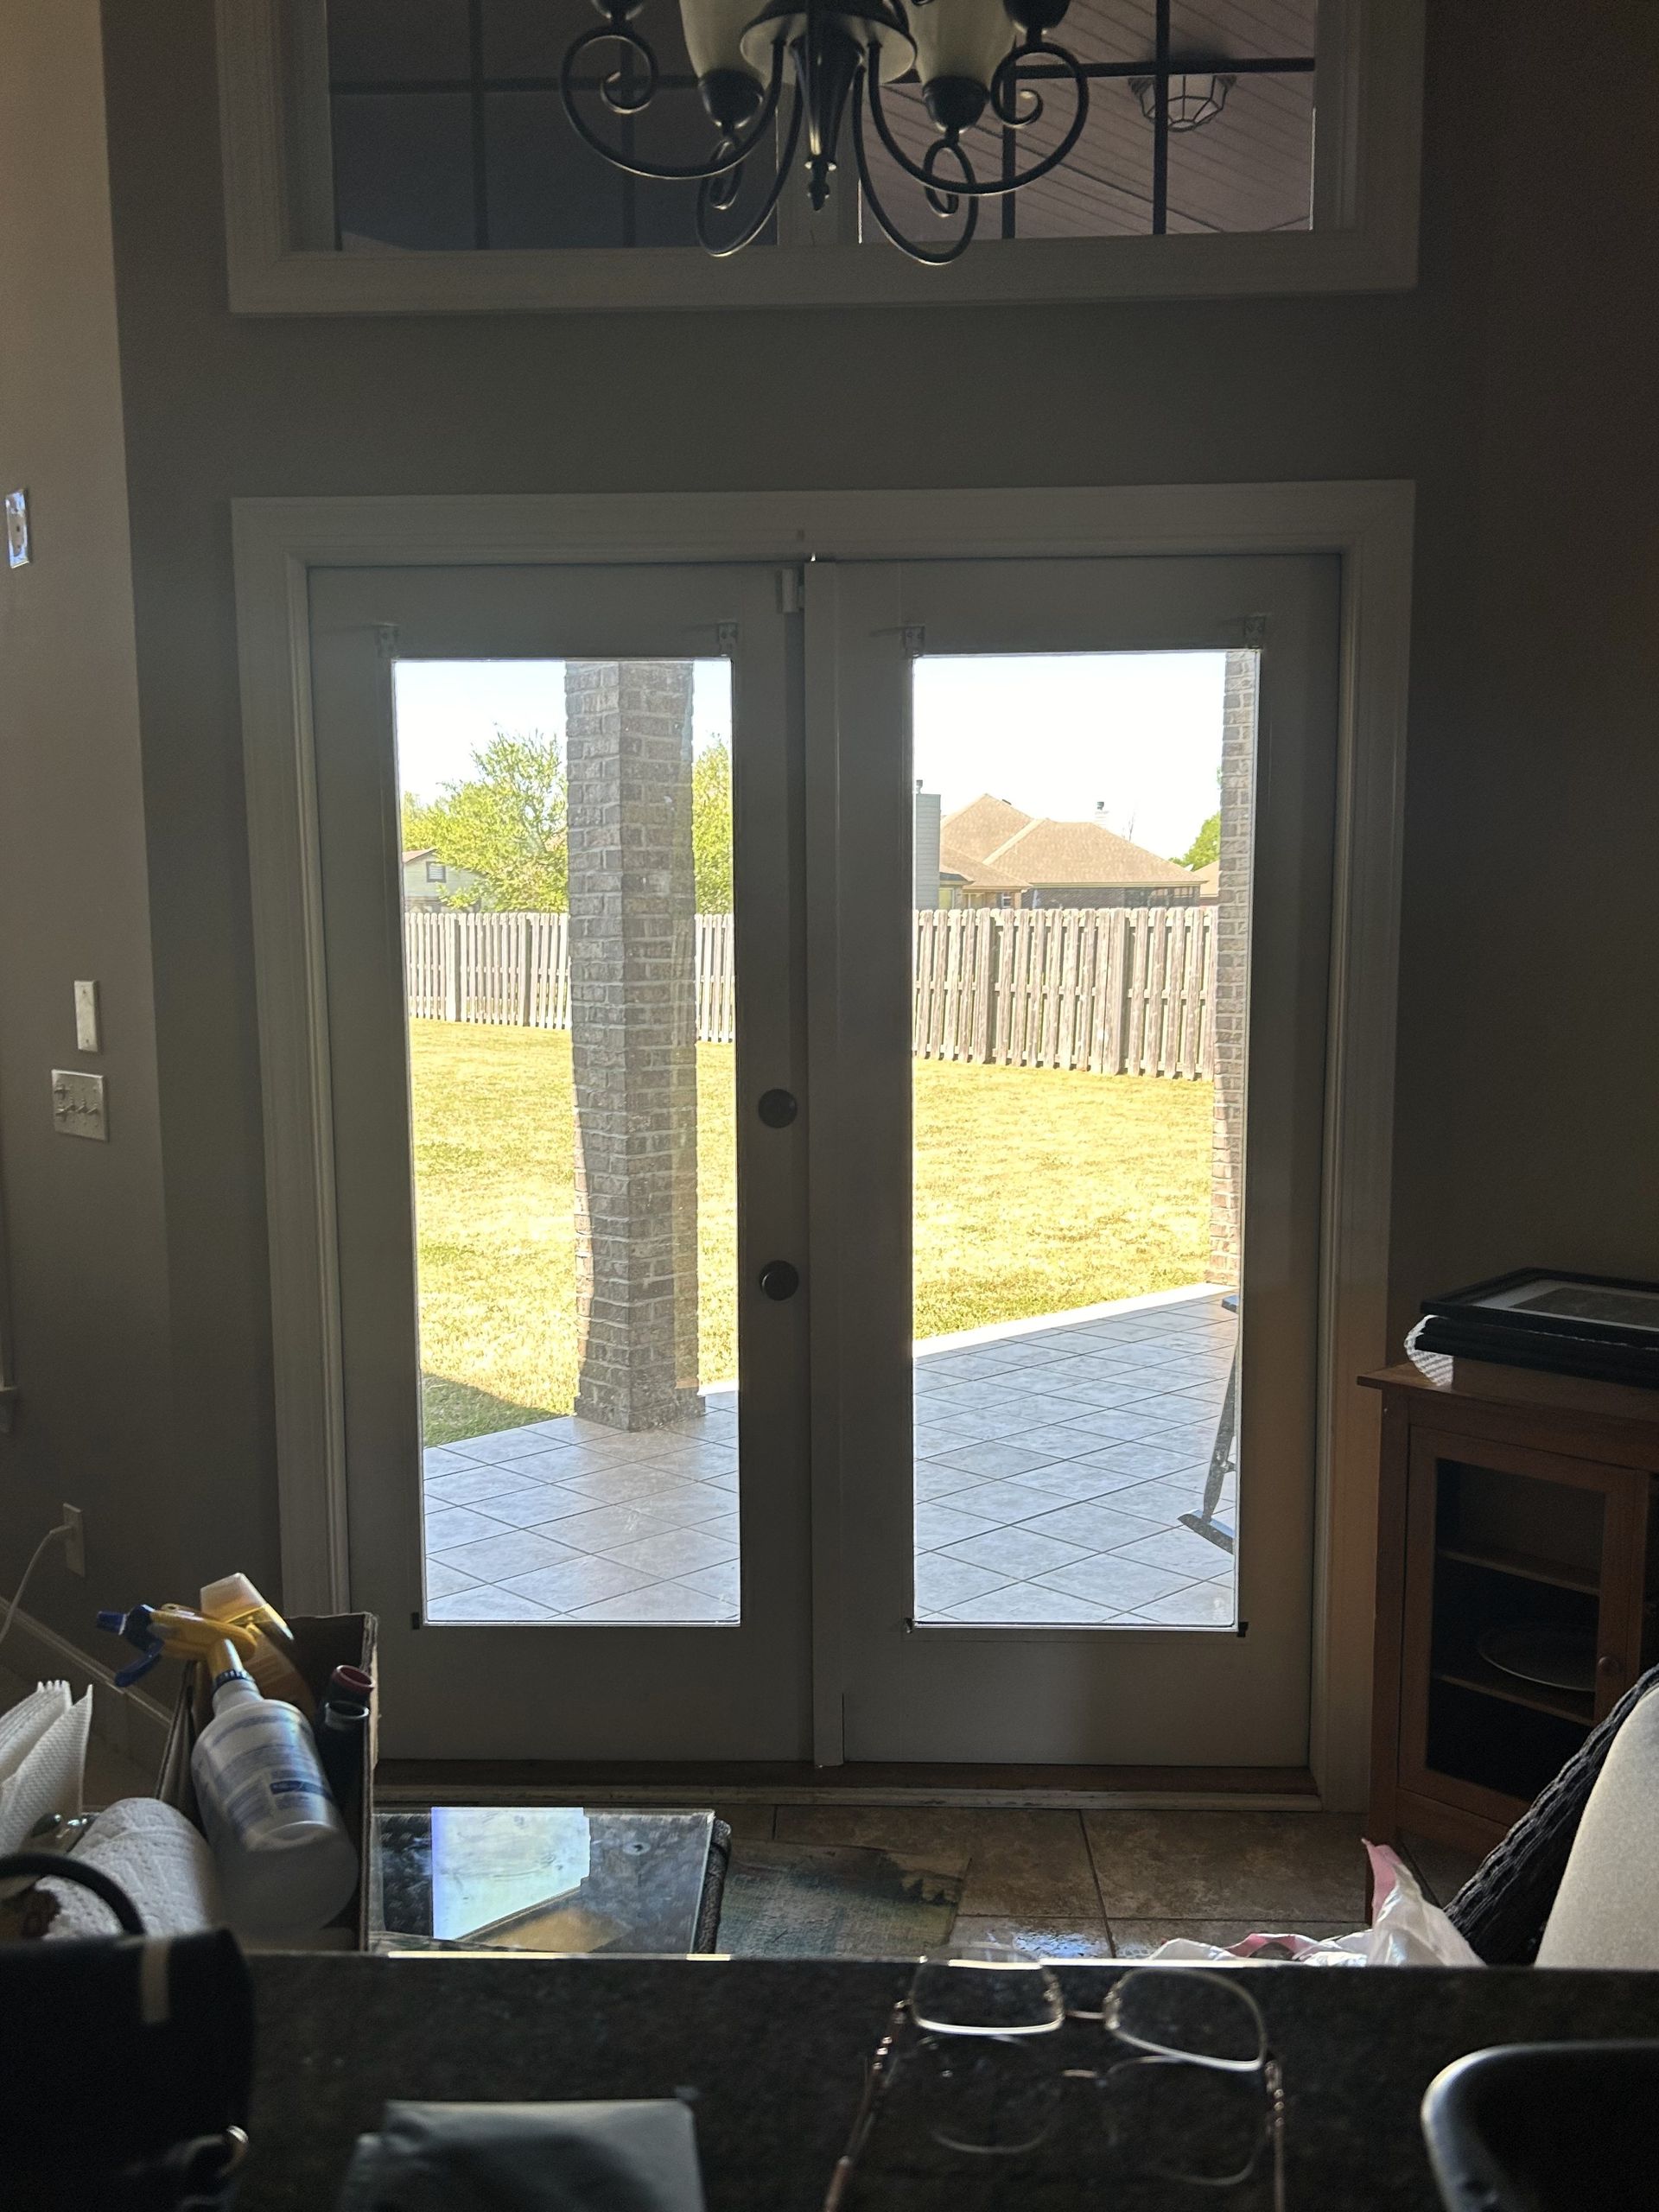 residential tint replaced blinds - bright Sun glare distortion has left the room including the view looking outside with SPF Supreme View Tint.